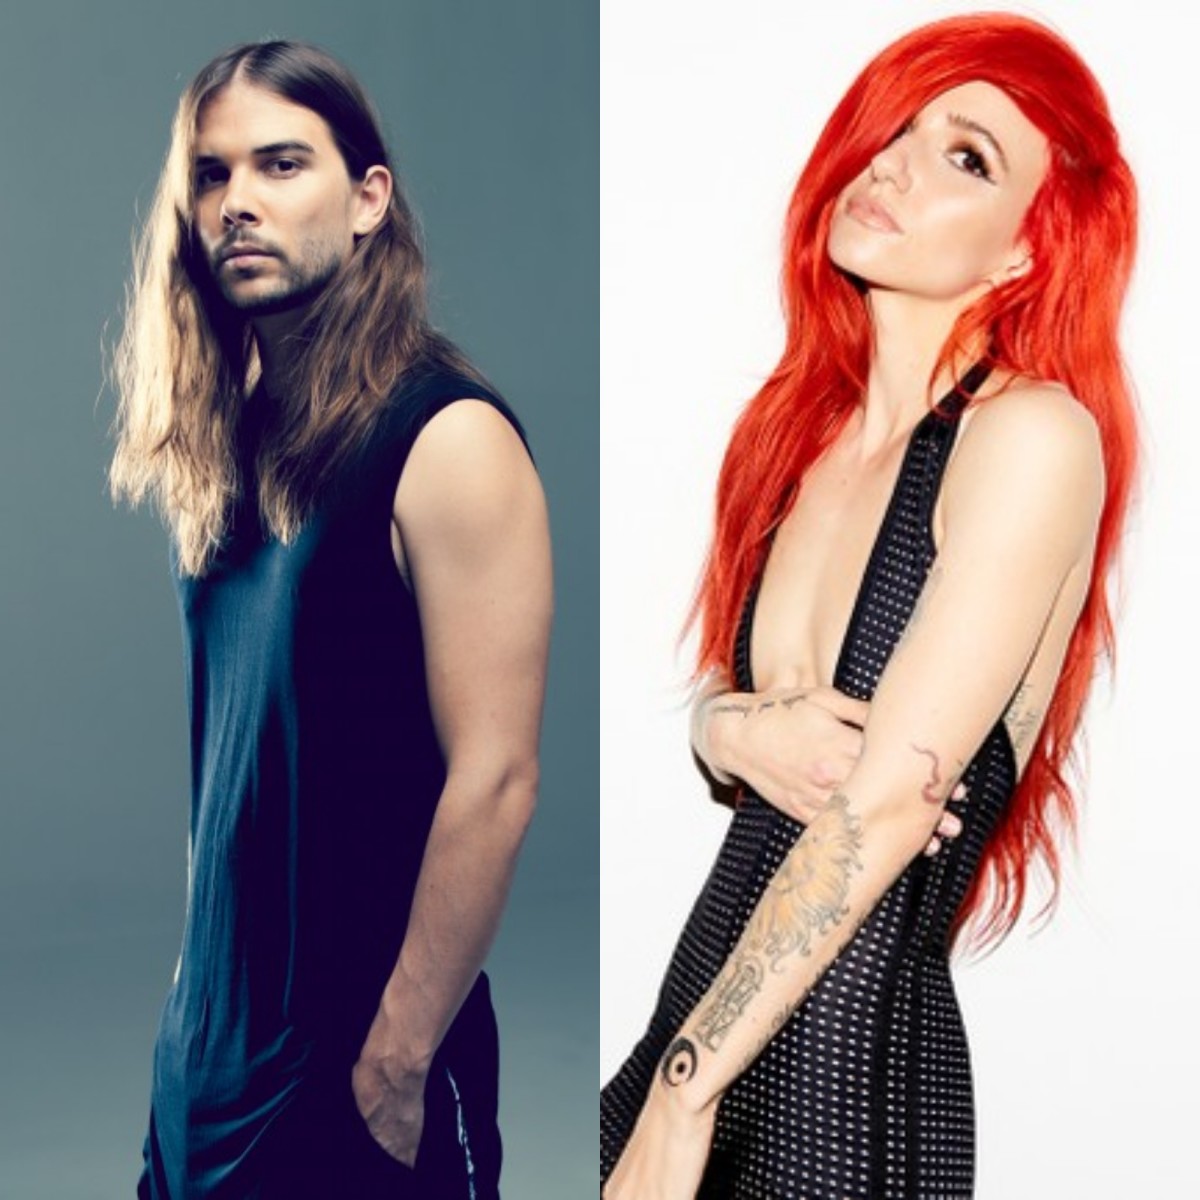 Seven Lions Debuts Unreleased Collaboration With Lights at Red Rocks